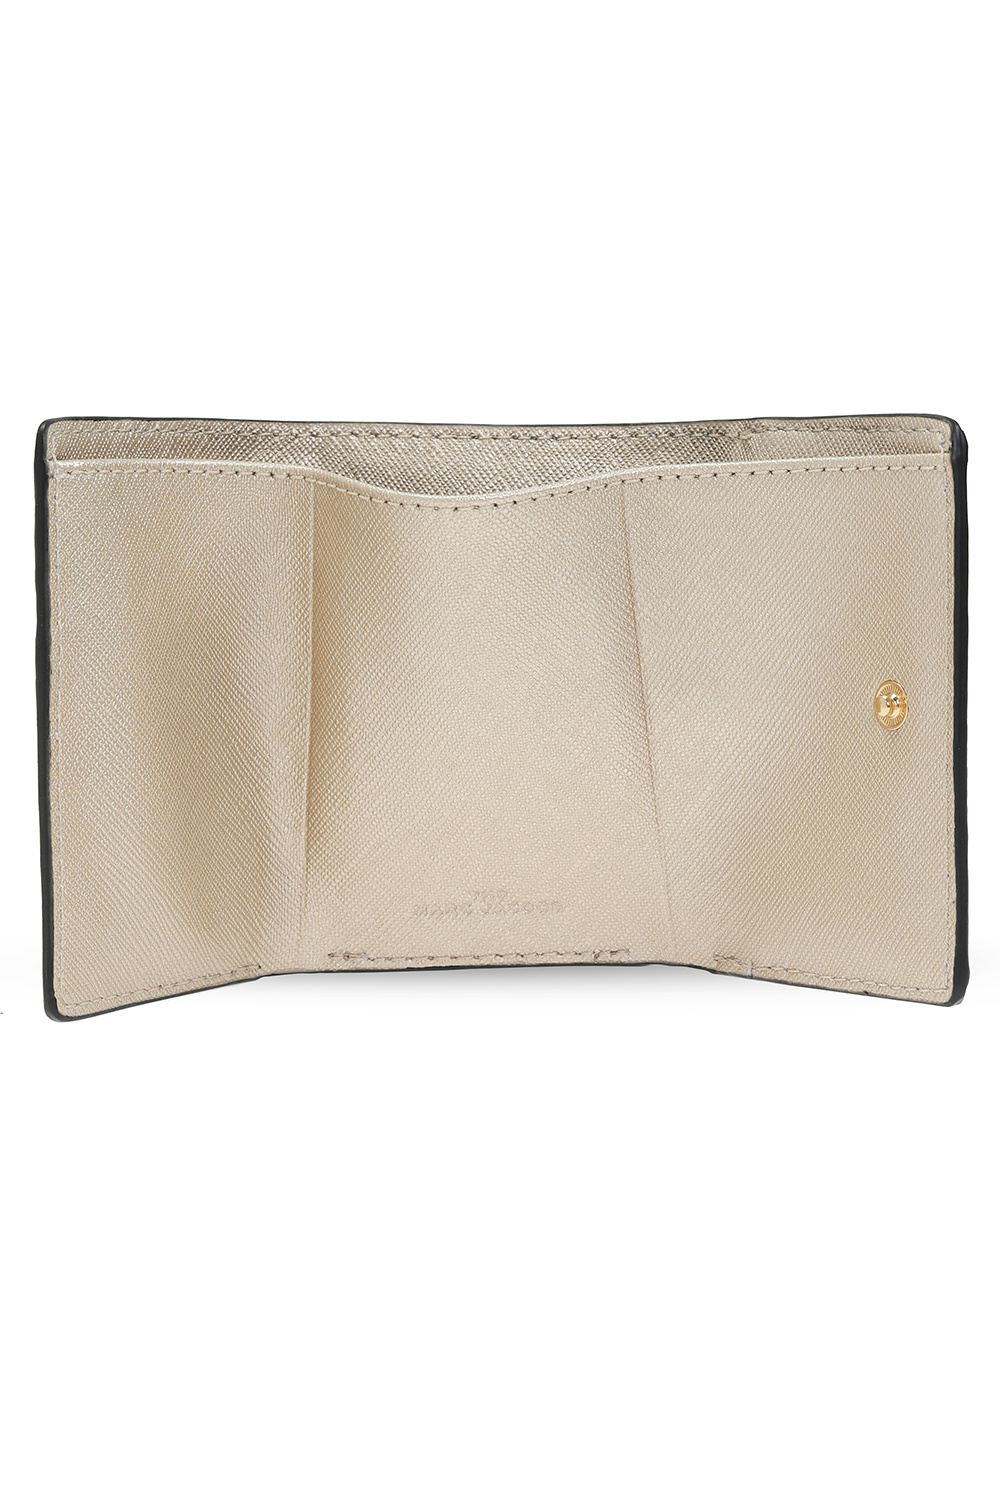 Marc Jacobs Marc Jacobs The WOMEN BAGS CLUTCH BAGS